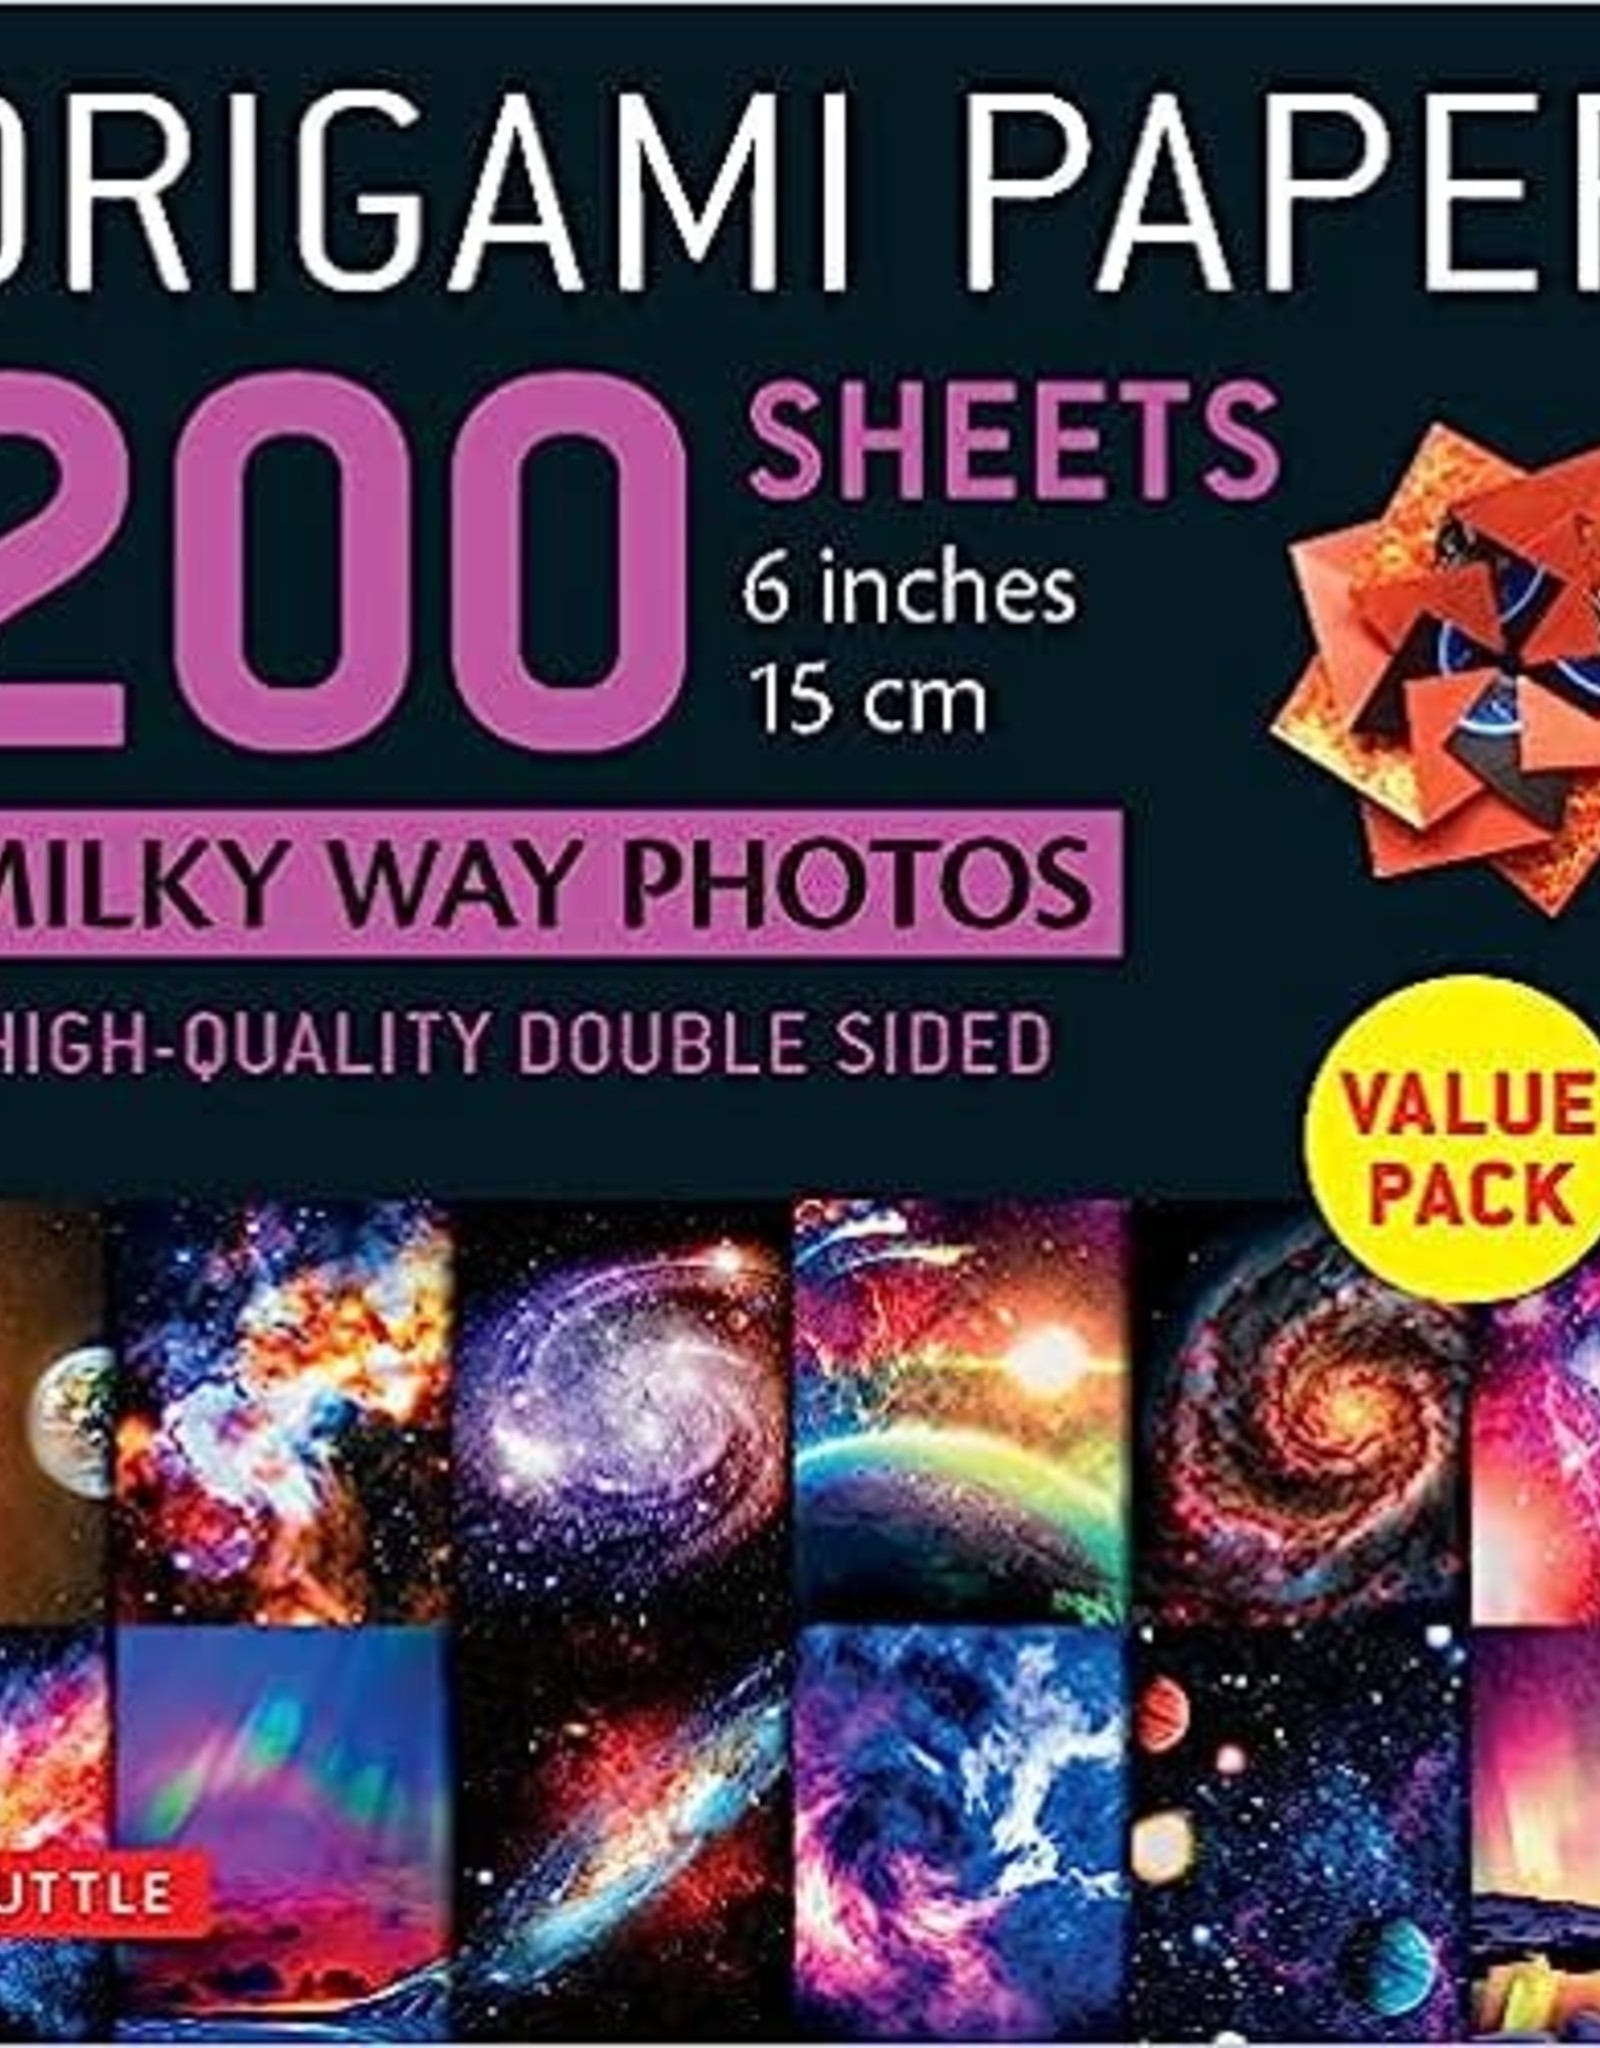 Origami Paper Sheets Milky Way Photos